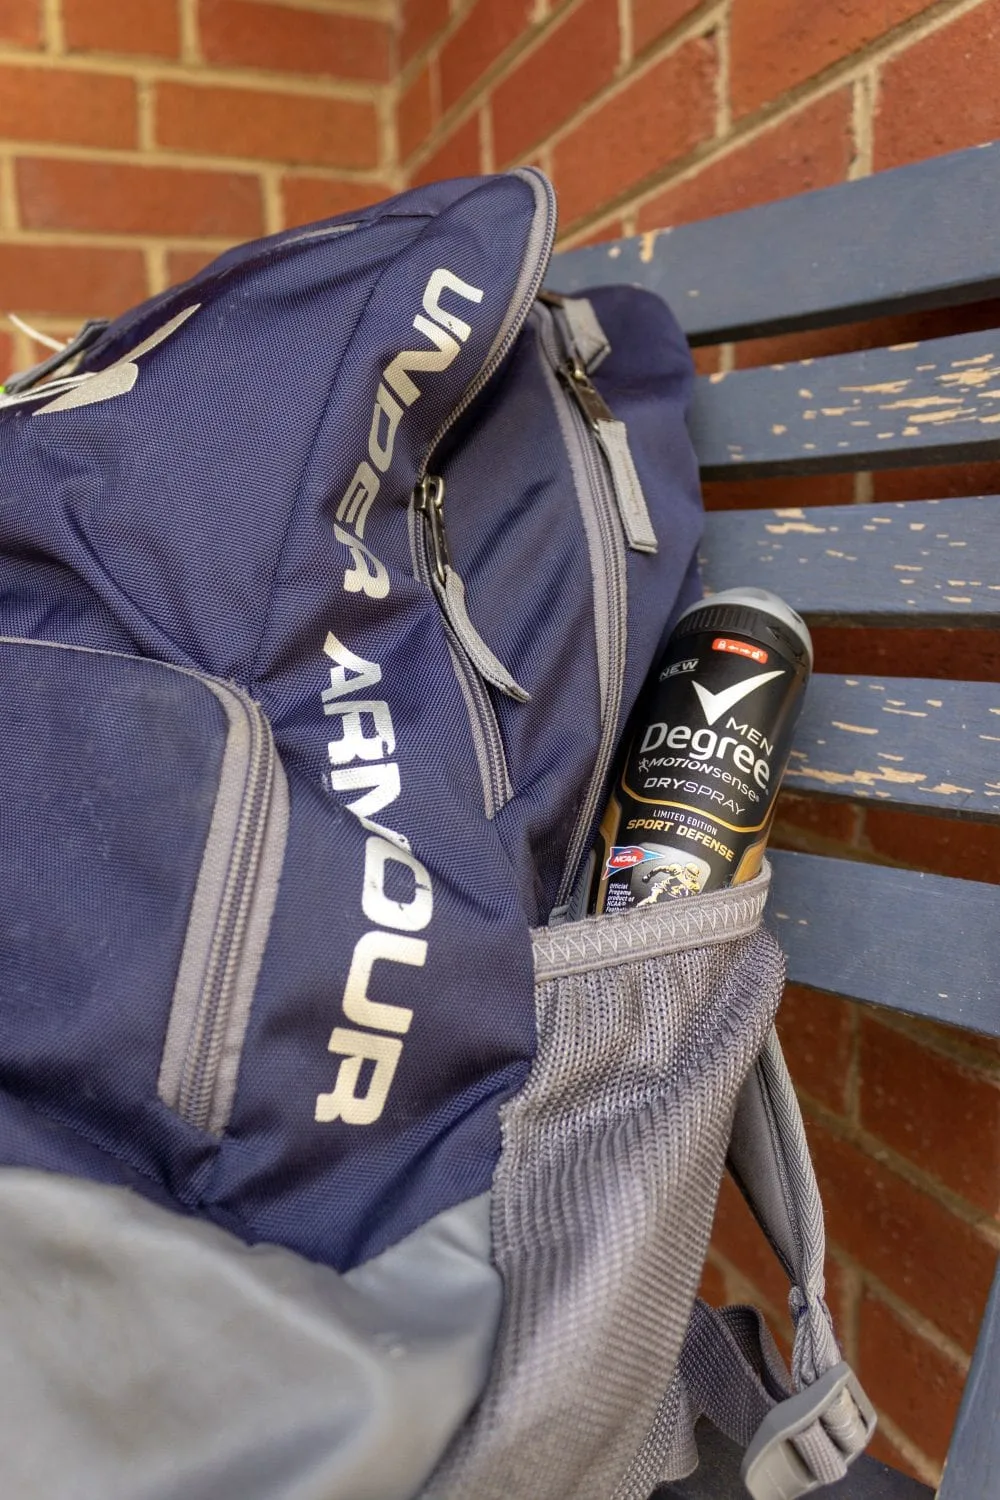 Under Armour backpack with Degree spray deodorant in the pocket. 